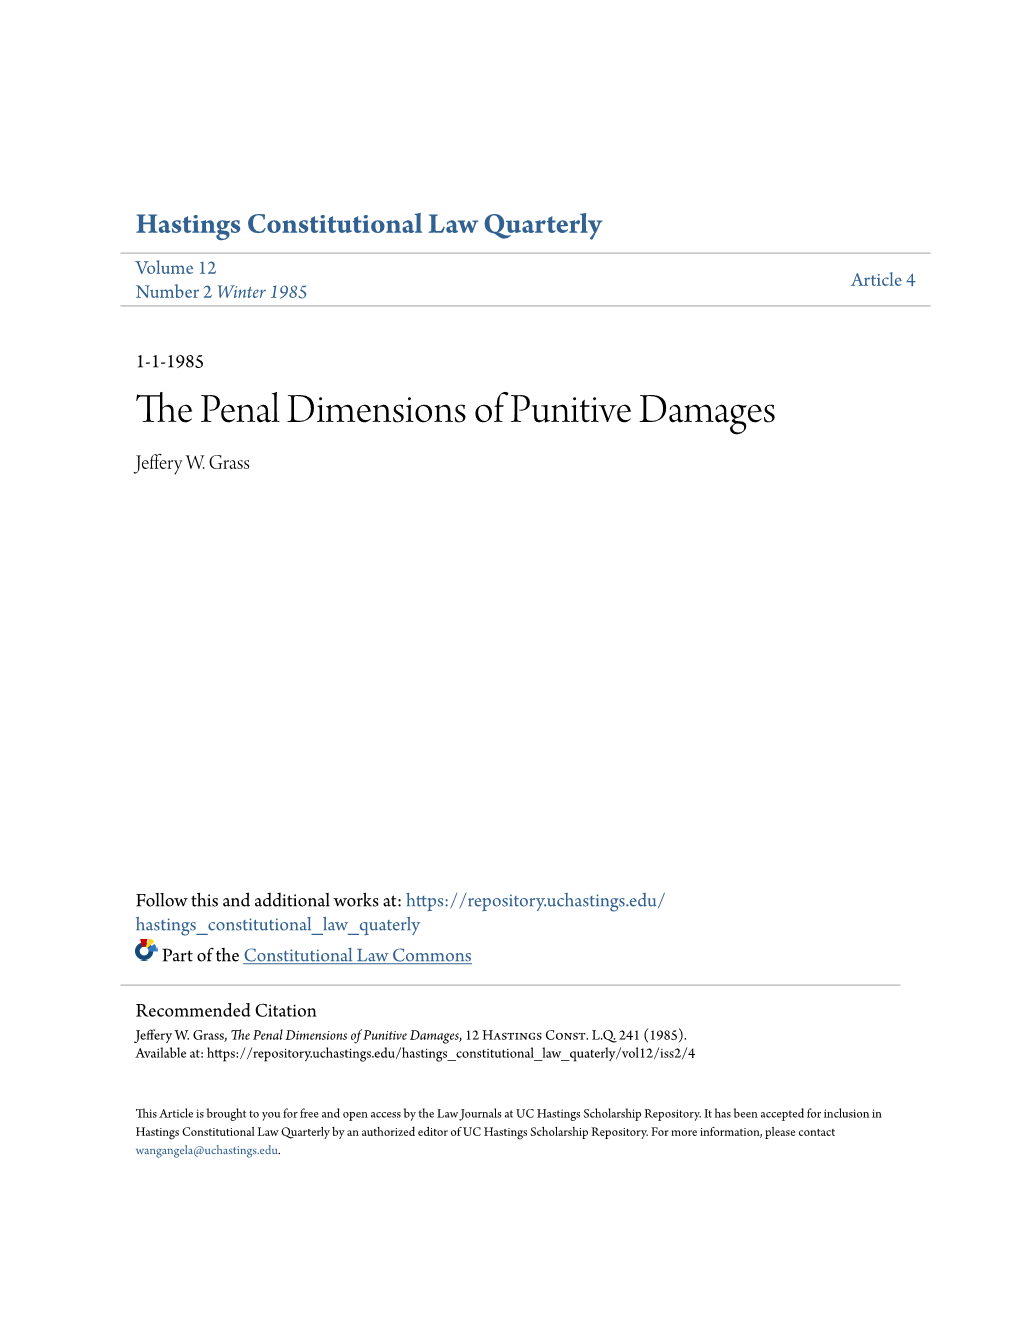 The Penal Dimensions of Punitive Damages, 12 Hastings Const